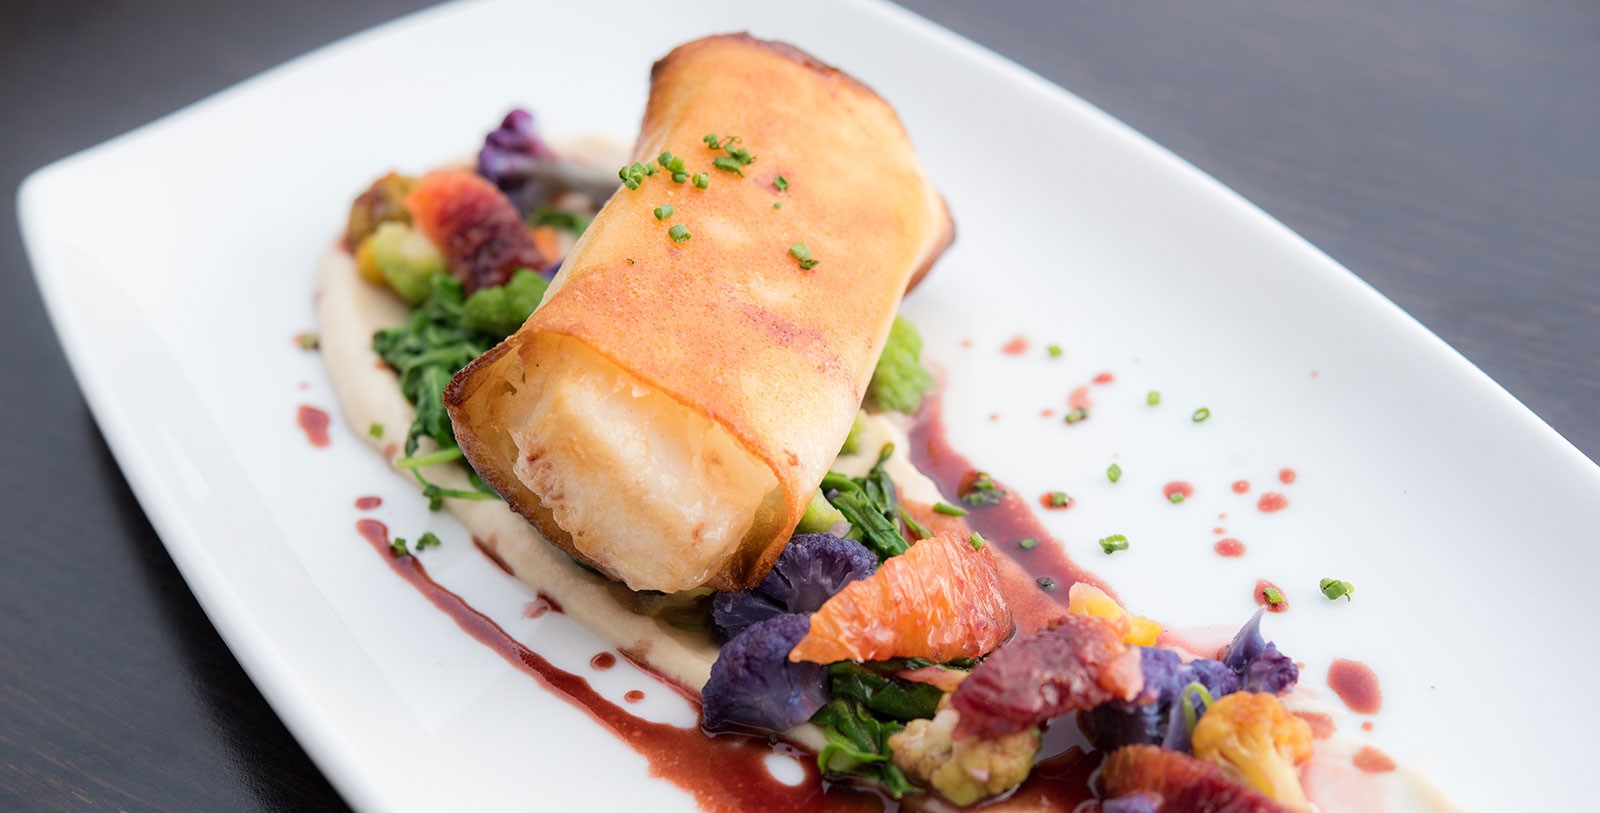 Taste outstanding California seafood at Splashes.